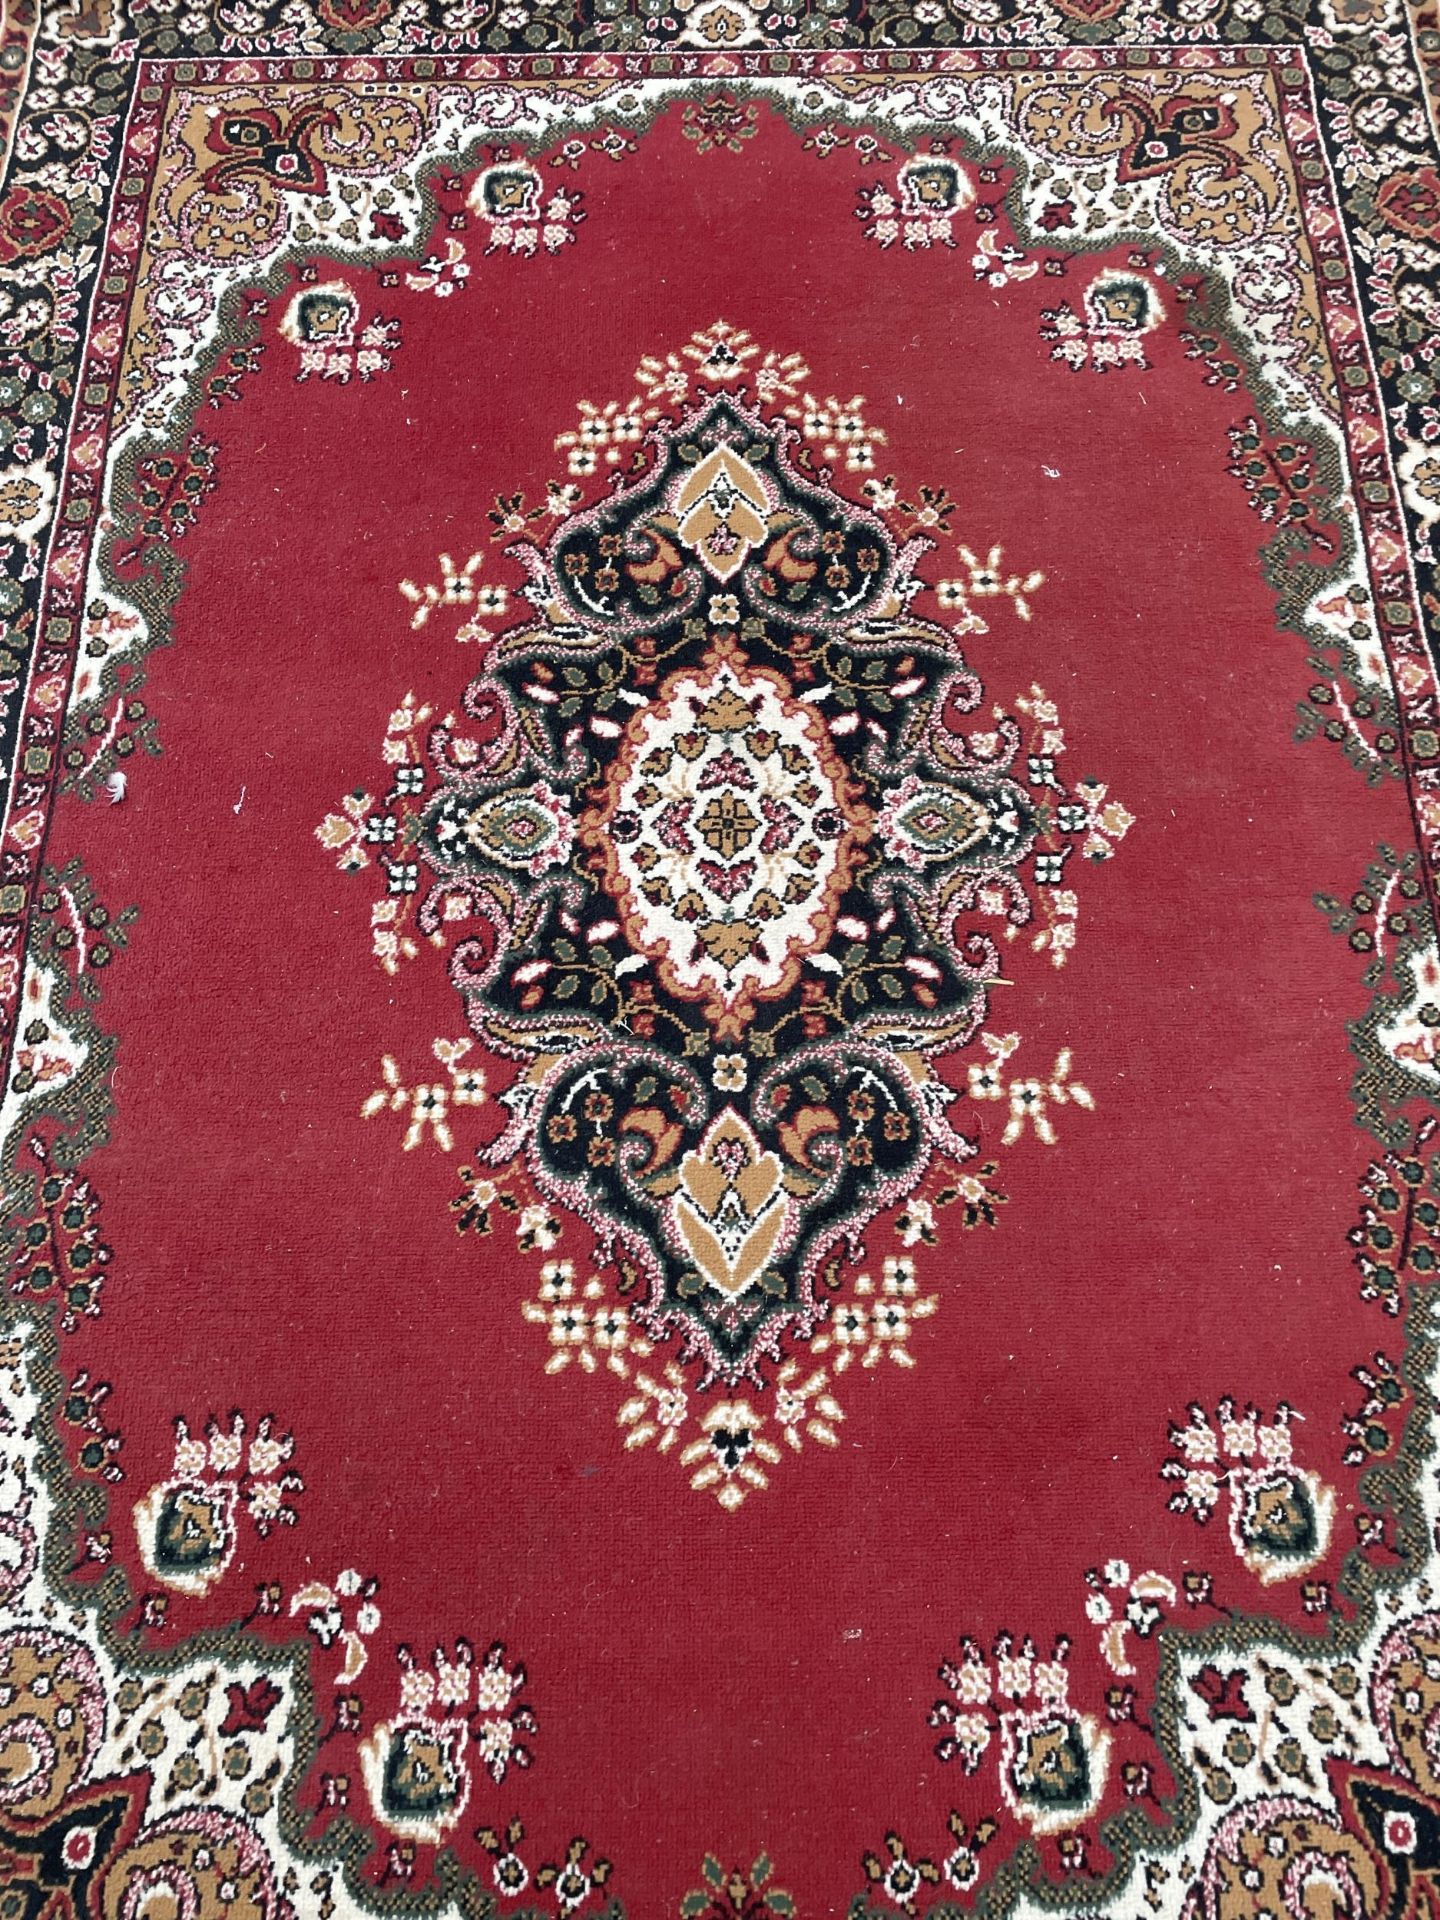 A RED PATTERNED RUG - Image 2 of 2